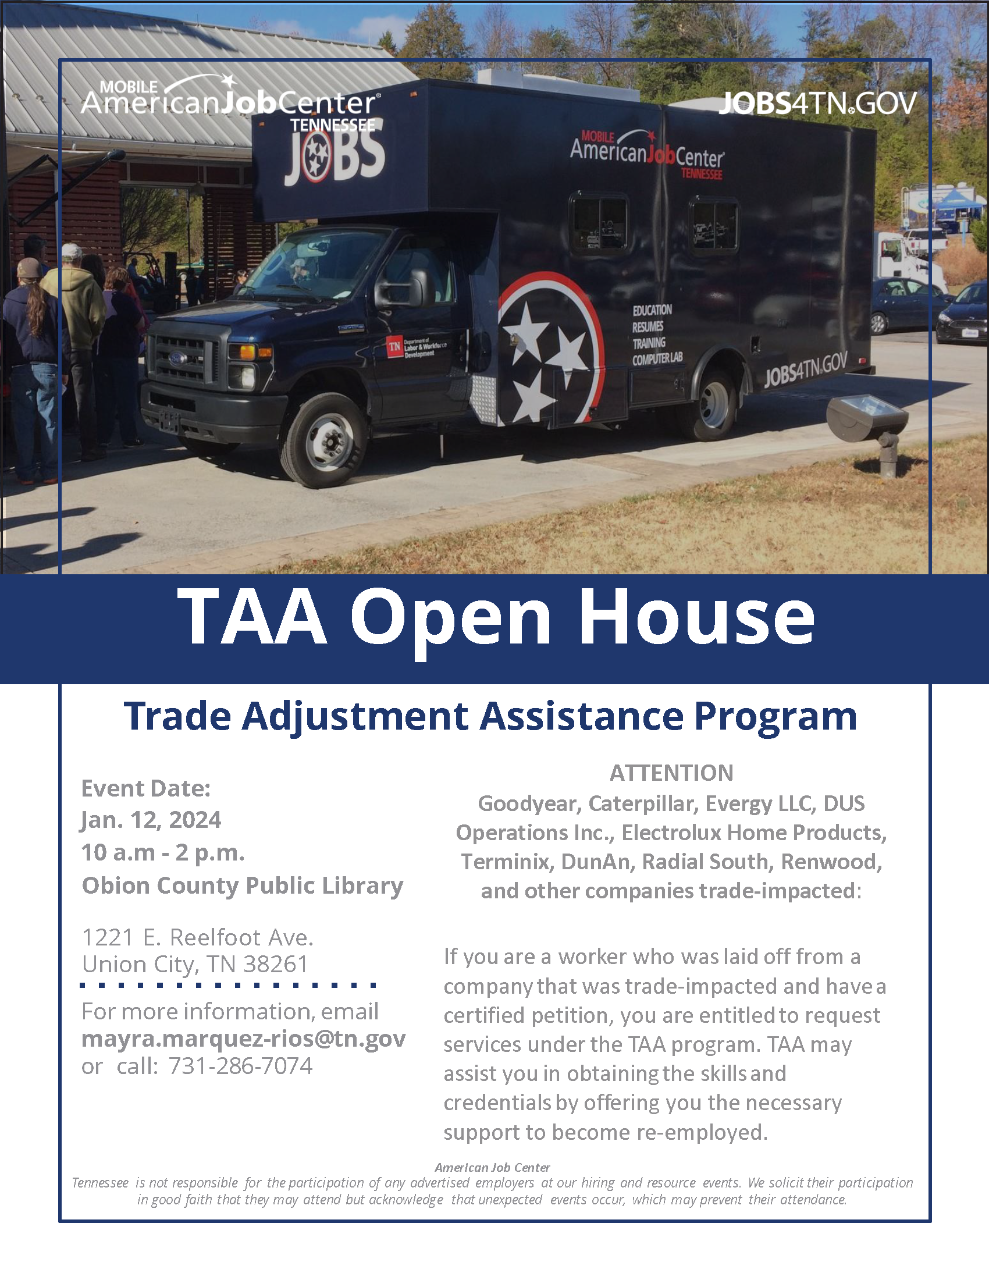 TAA Open House - Union City, TN, 1/12/2024 from 10 a.m. to 2 p.m.